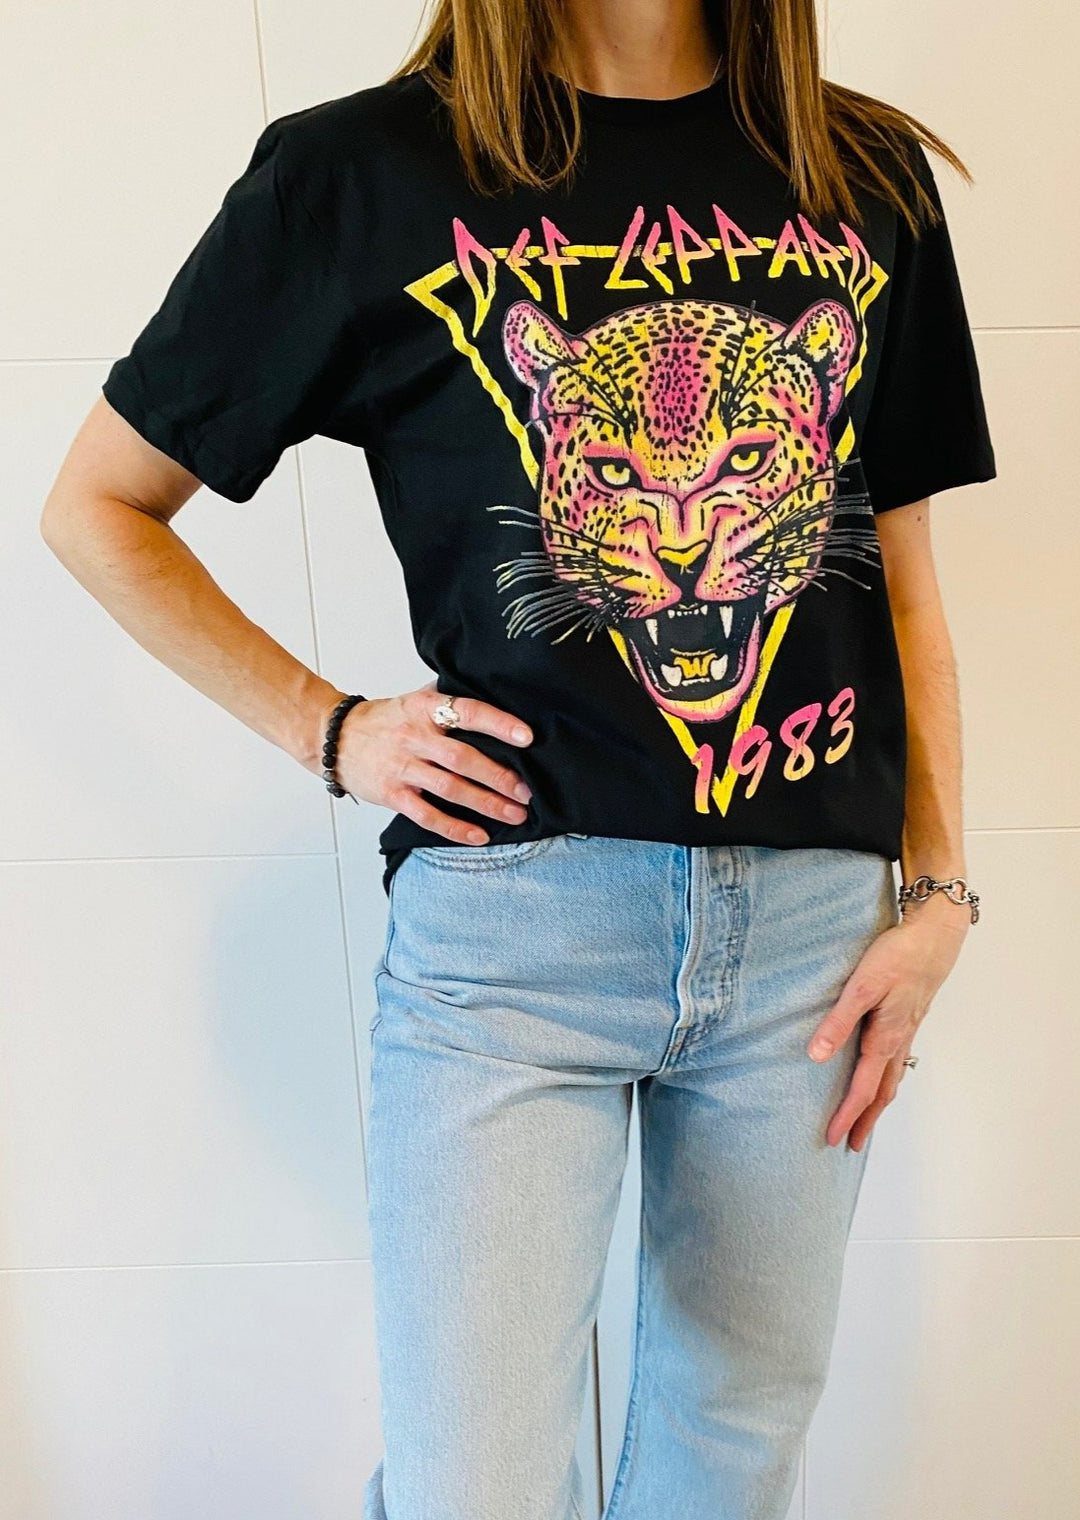 DEF LEOPARD 1983 COLORFUL GRAPHIC TEE